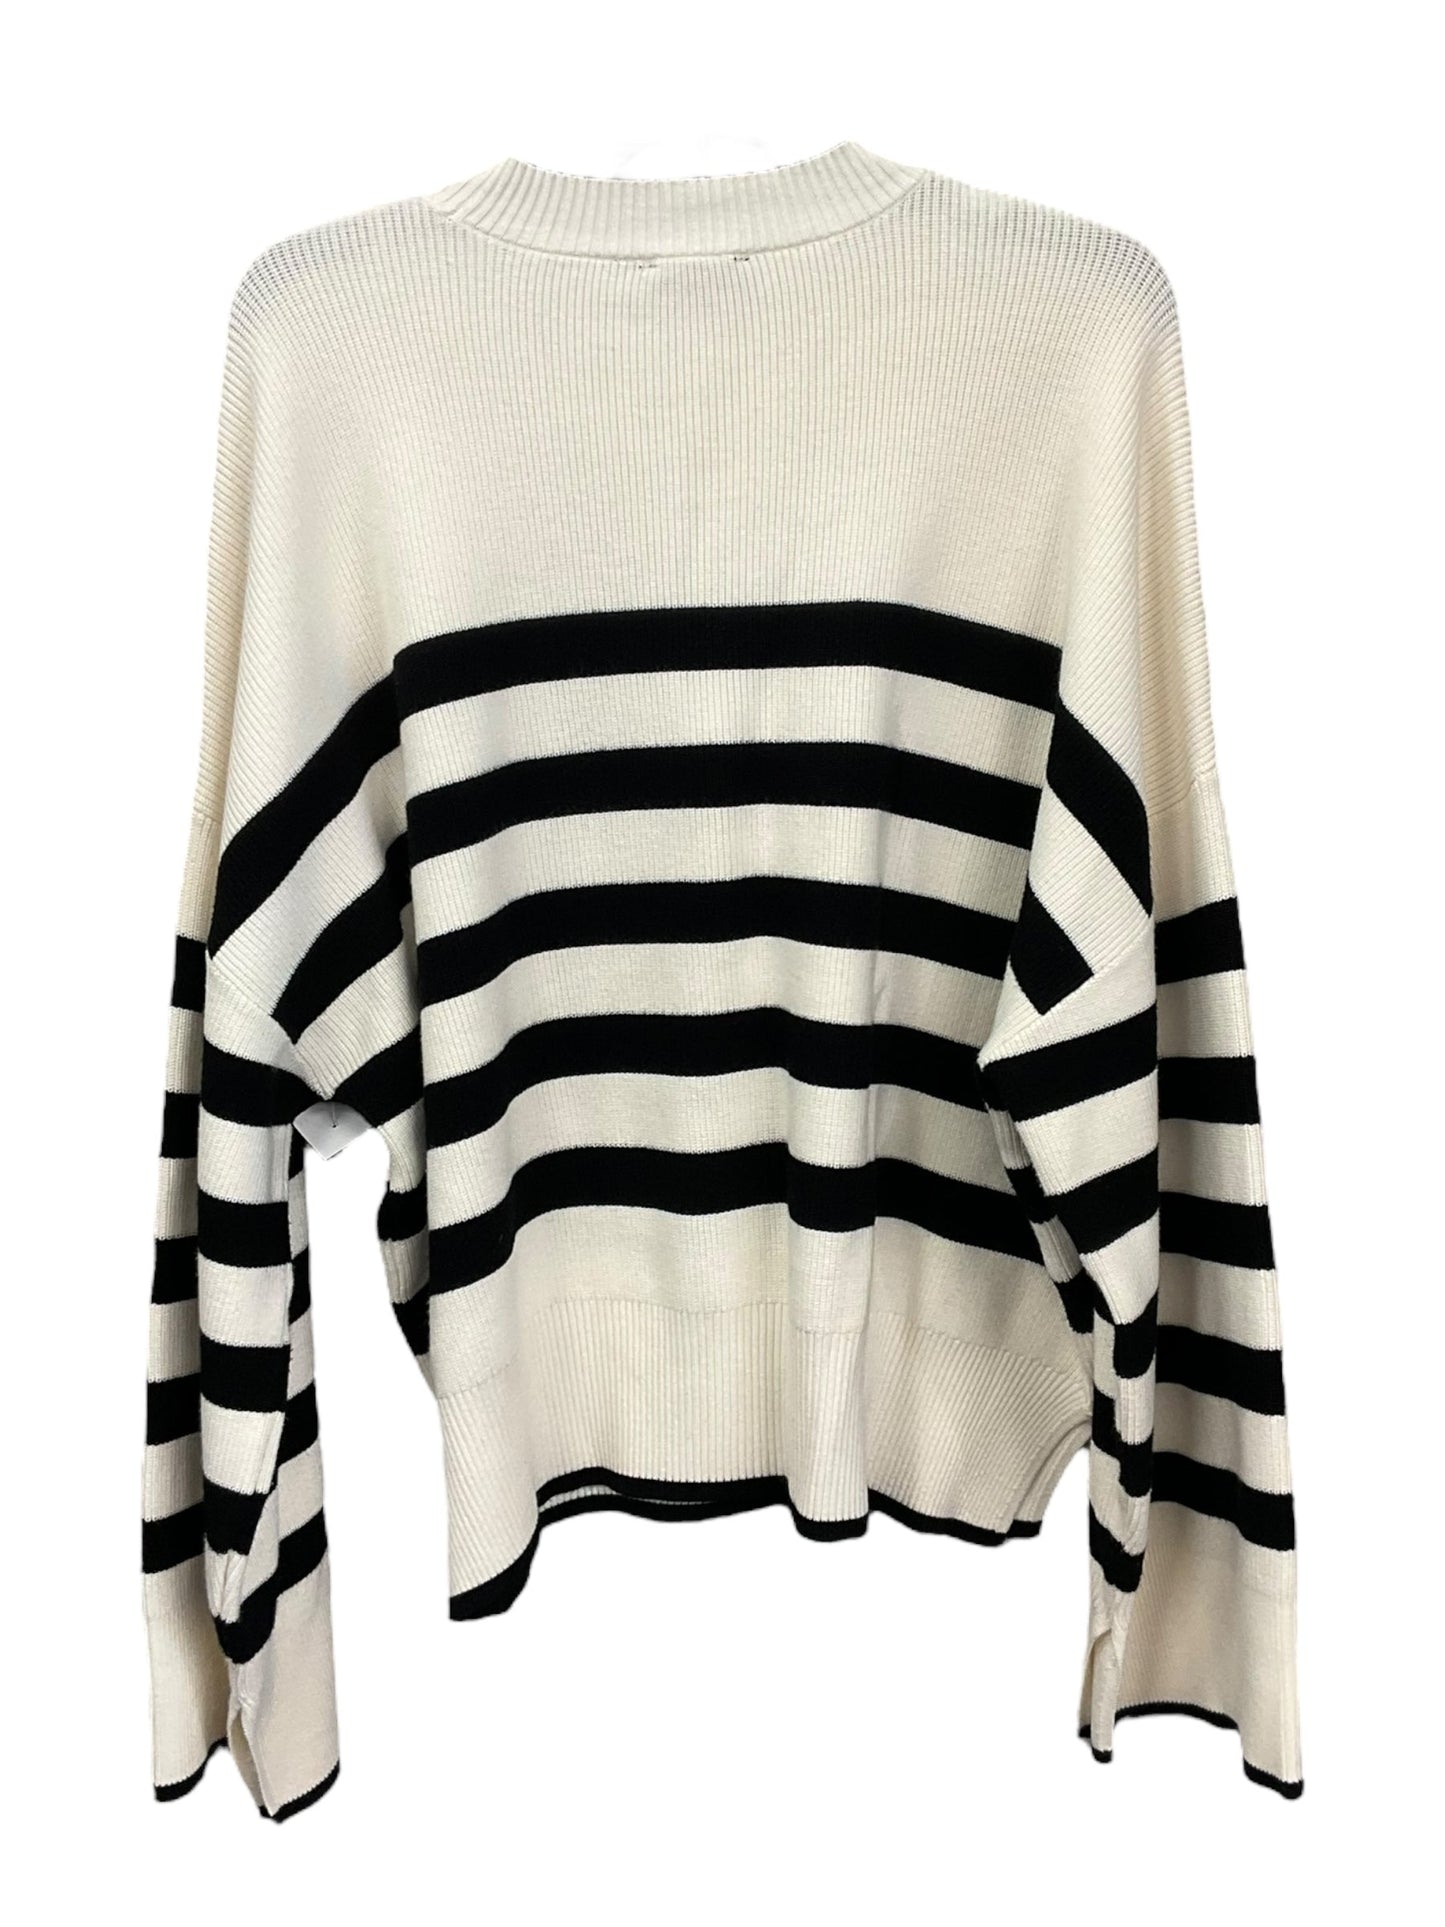 Striped Pattern Sweater Clothes Mentor, Size Xl